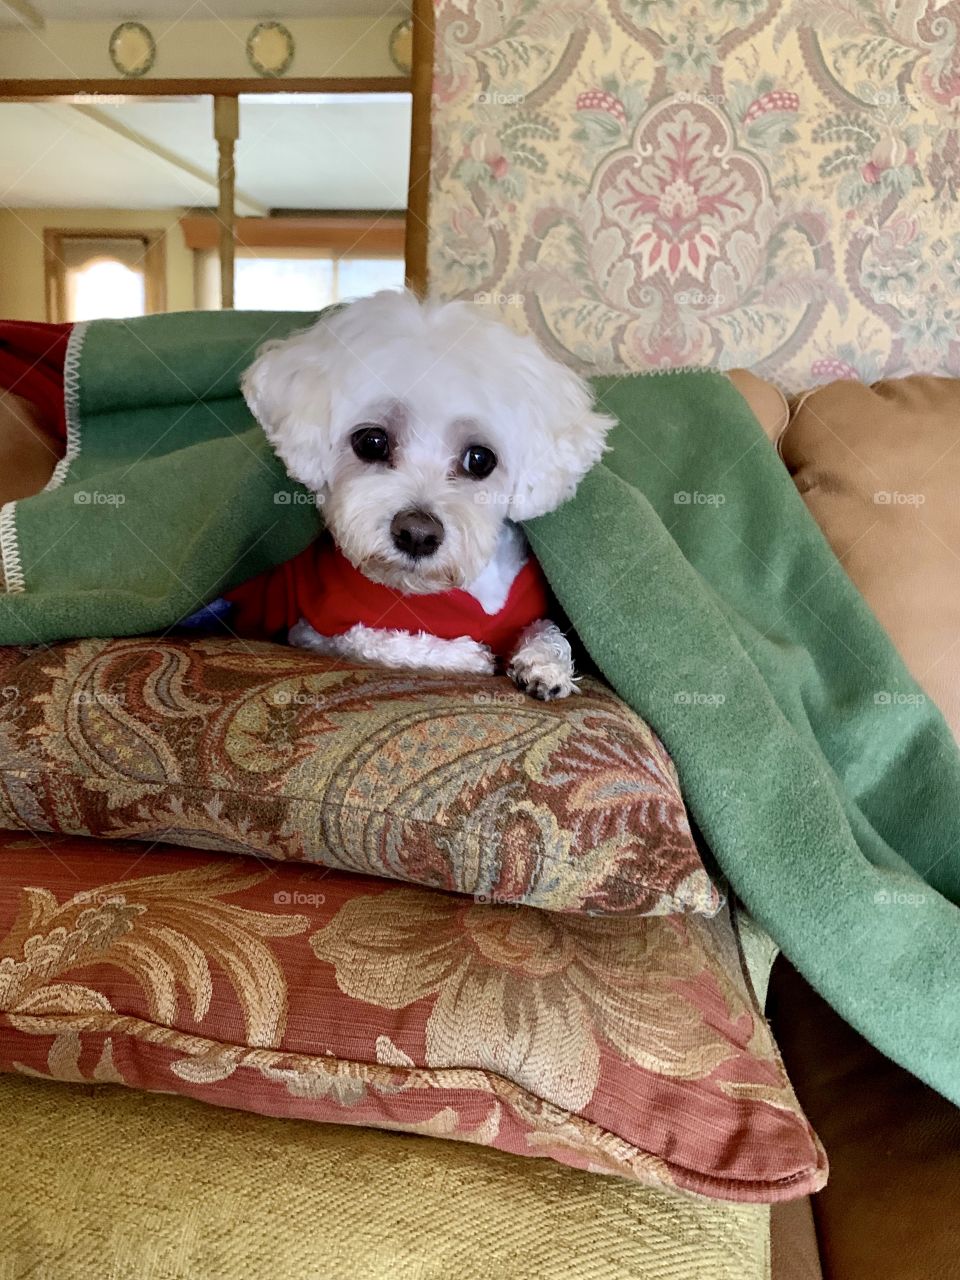 Adorable white Maltese dog under blankets, in sweater, on pillows  